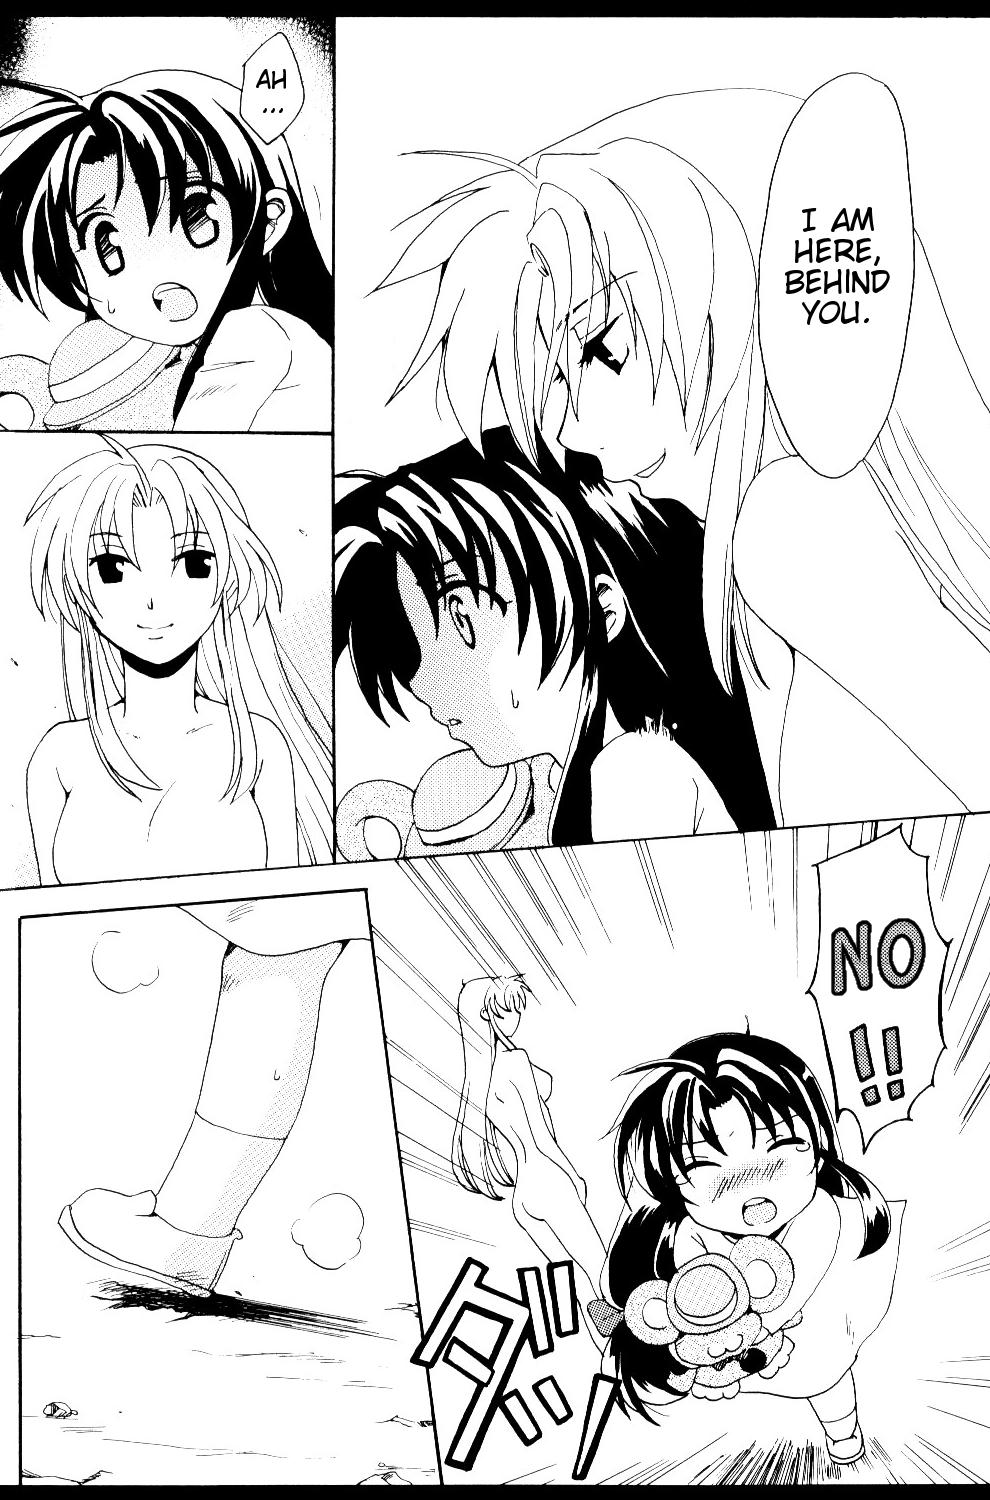 Groupsex Misomeru Futari | The Two Who Fall in Love at First Sight - Full metal panic Nylons - Page 5